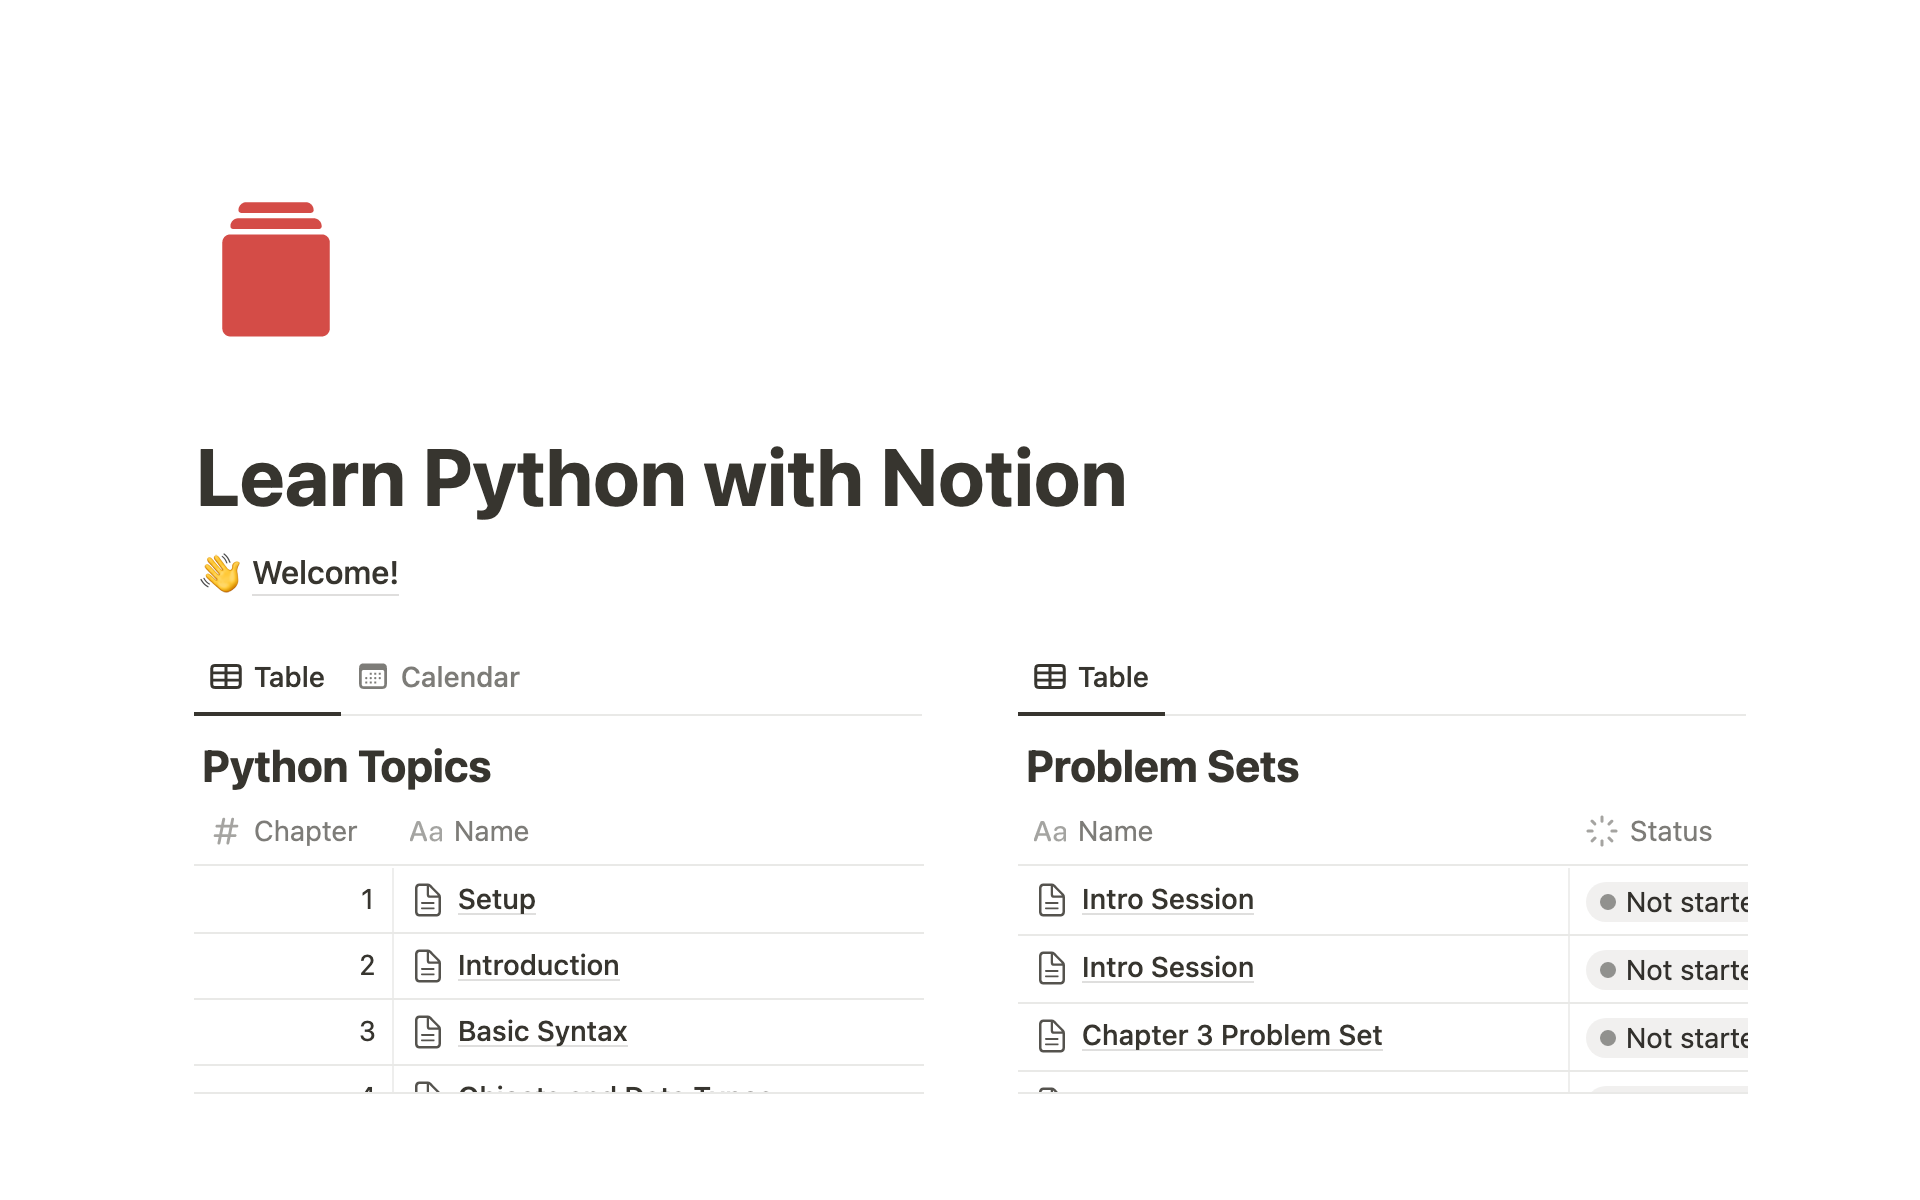 Learn the Python language and work problem sets.